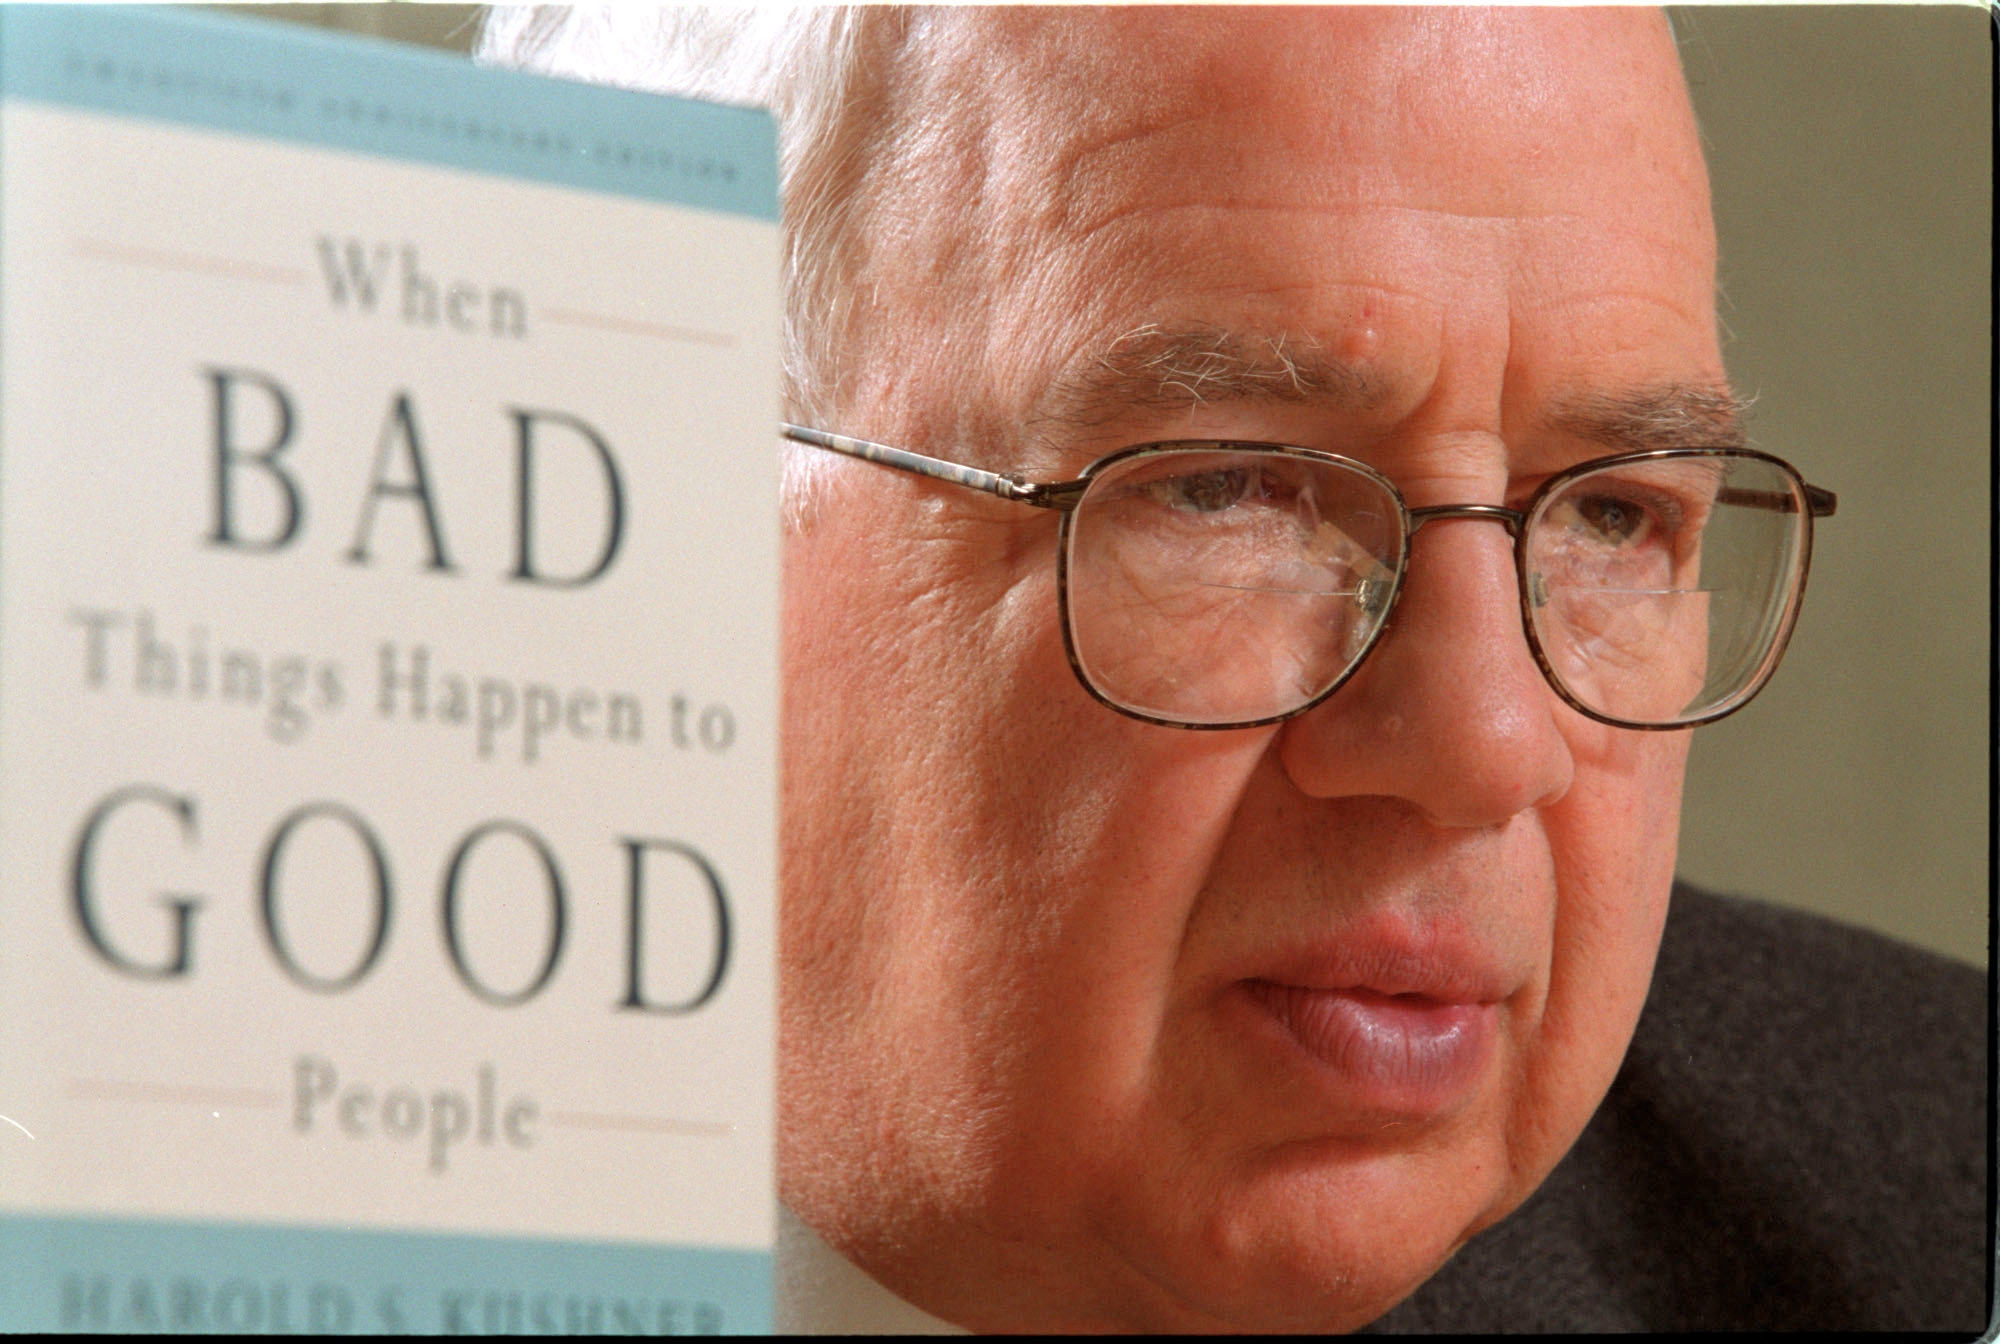 Author and Rabbi Harold Kushner is pictured with his best-selling book, “When Bad Things Happen to Good People,” in 2001. (Ron Bull/Toronto Star via Getty Images)